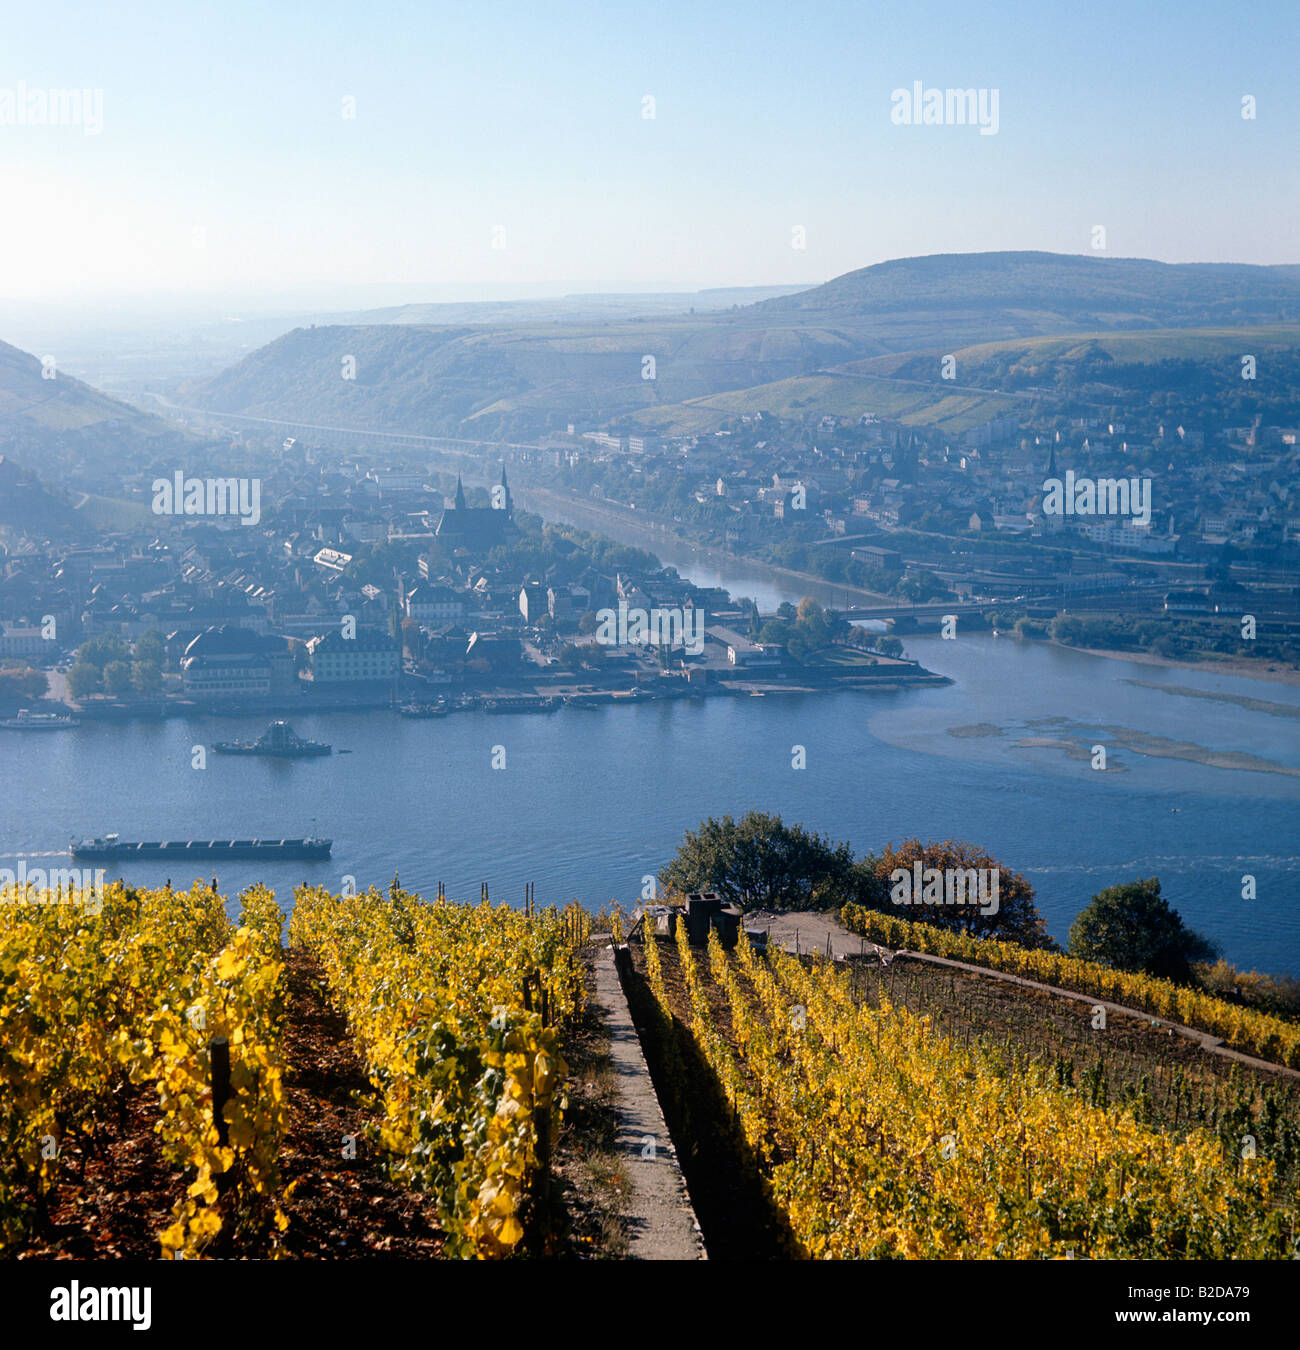 Bingen historic river port where the river Nahe joins the Rhein river View from Ehrenfels vineyards looking East Stock Photo